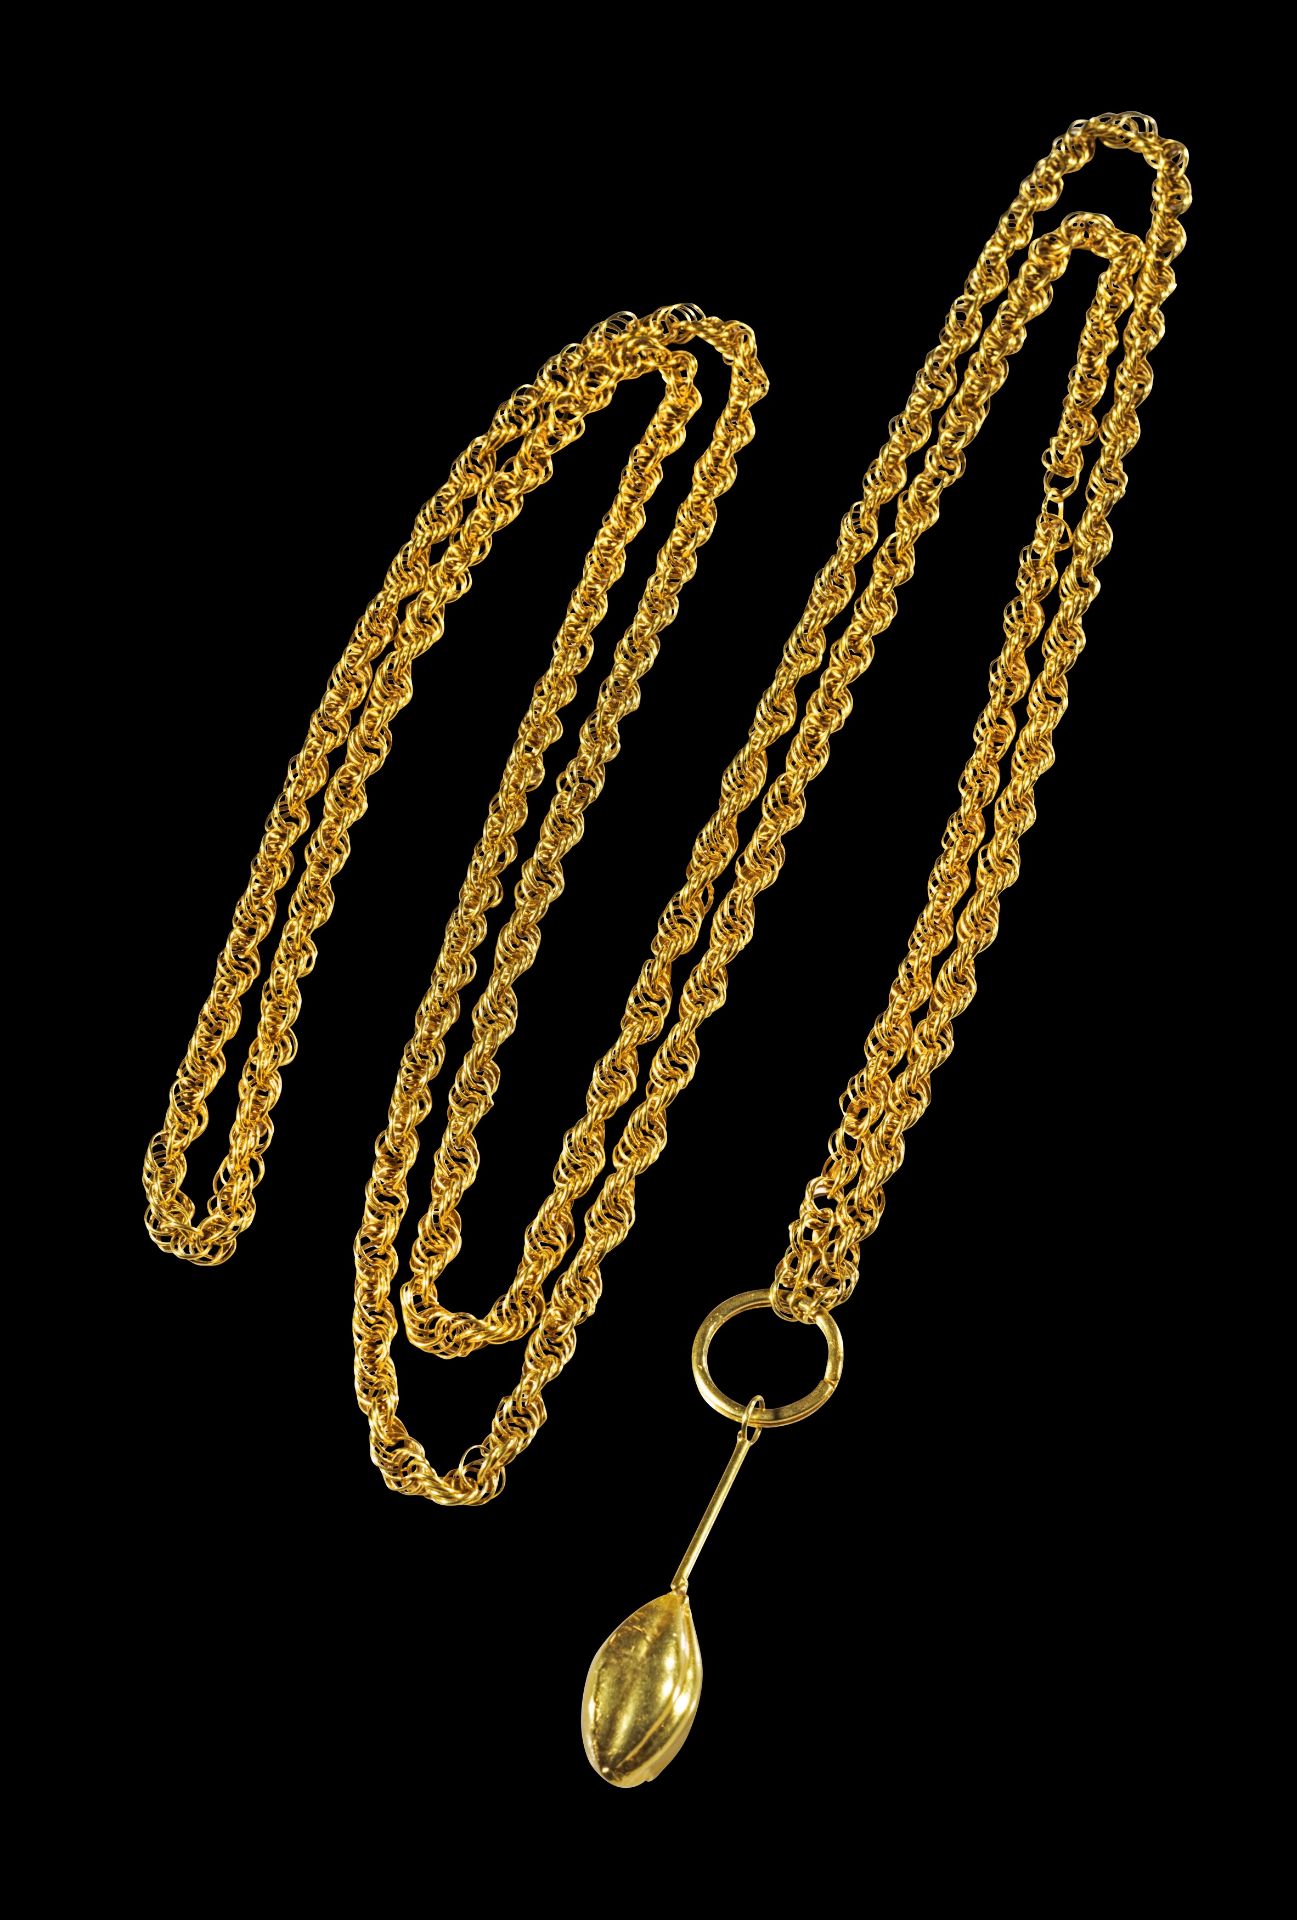 Gold necklace of an Ashanti Chief with pendant.